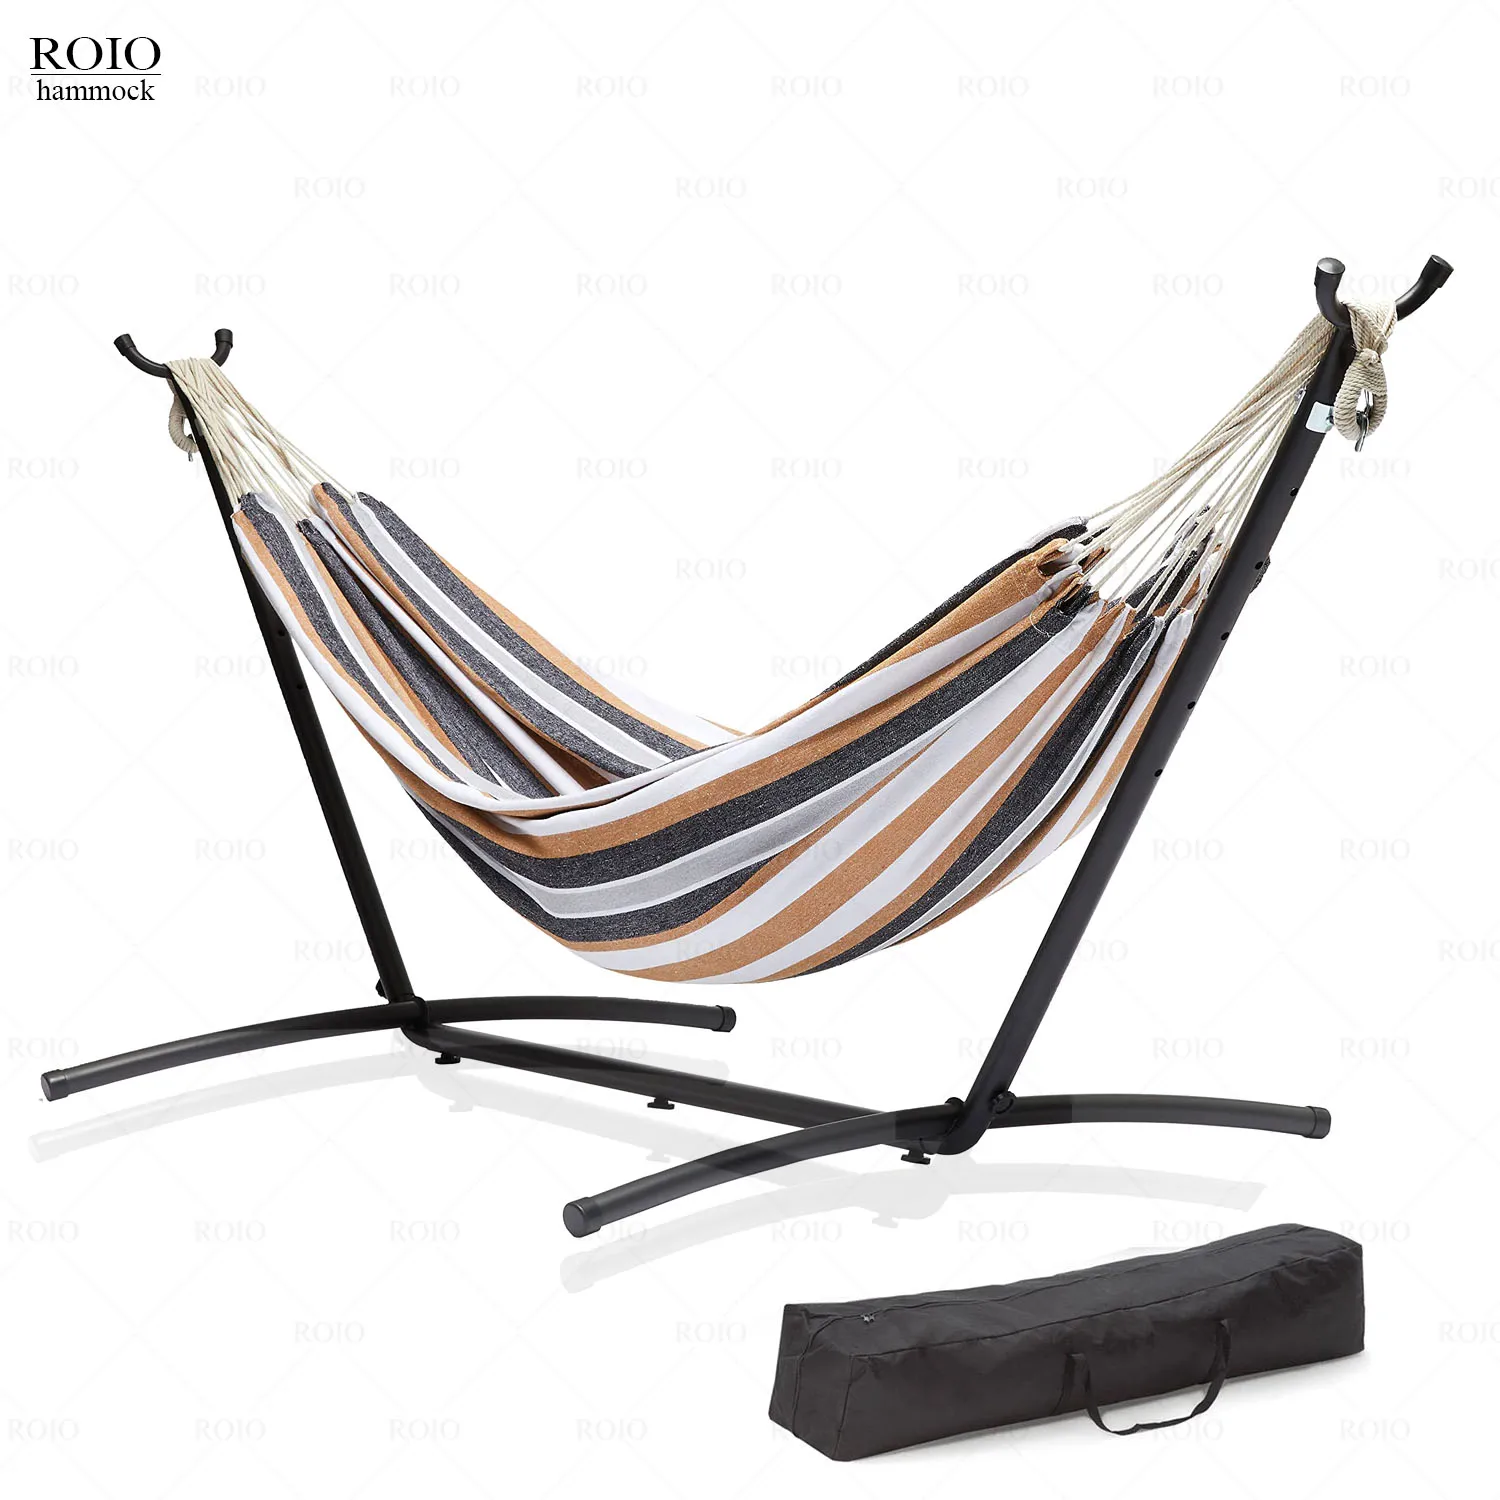 Camping Hammock 1-2 People Travel Pool Portable Hanging Bed Chair Garden Swing Stand Beach Outdoor Thicken Hammock With Bracket